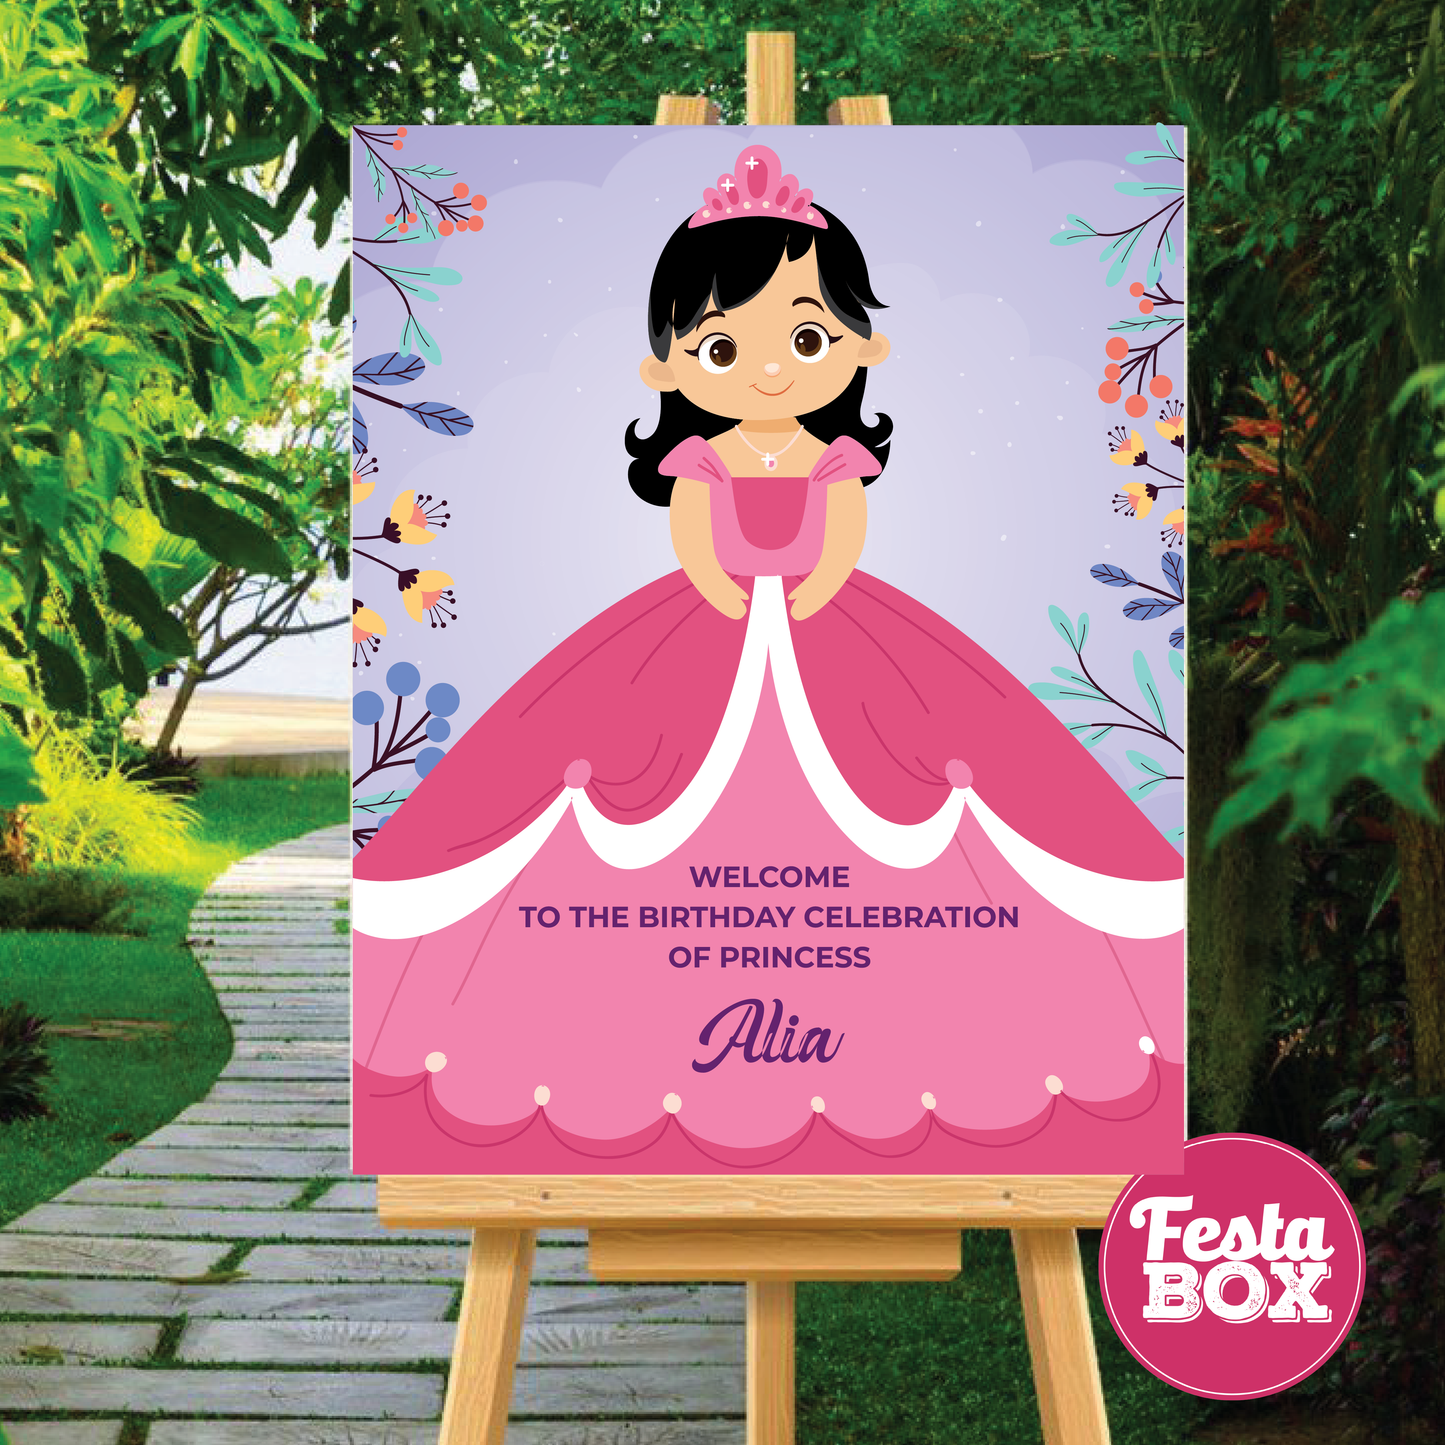 Welcome Sign for Birthday Party Decoration - Princess Theme - Option 2